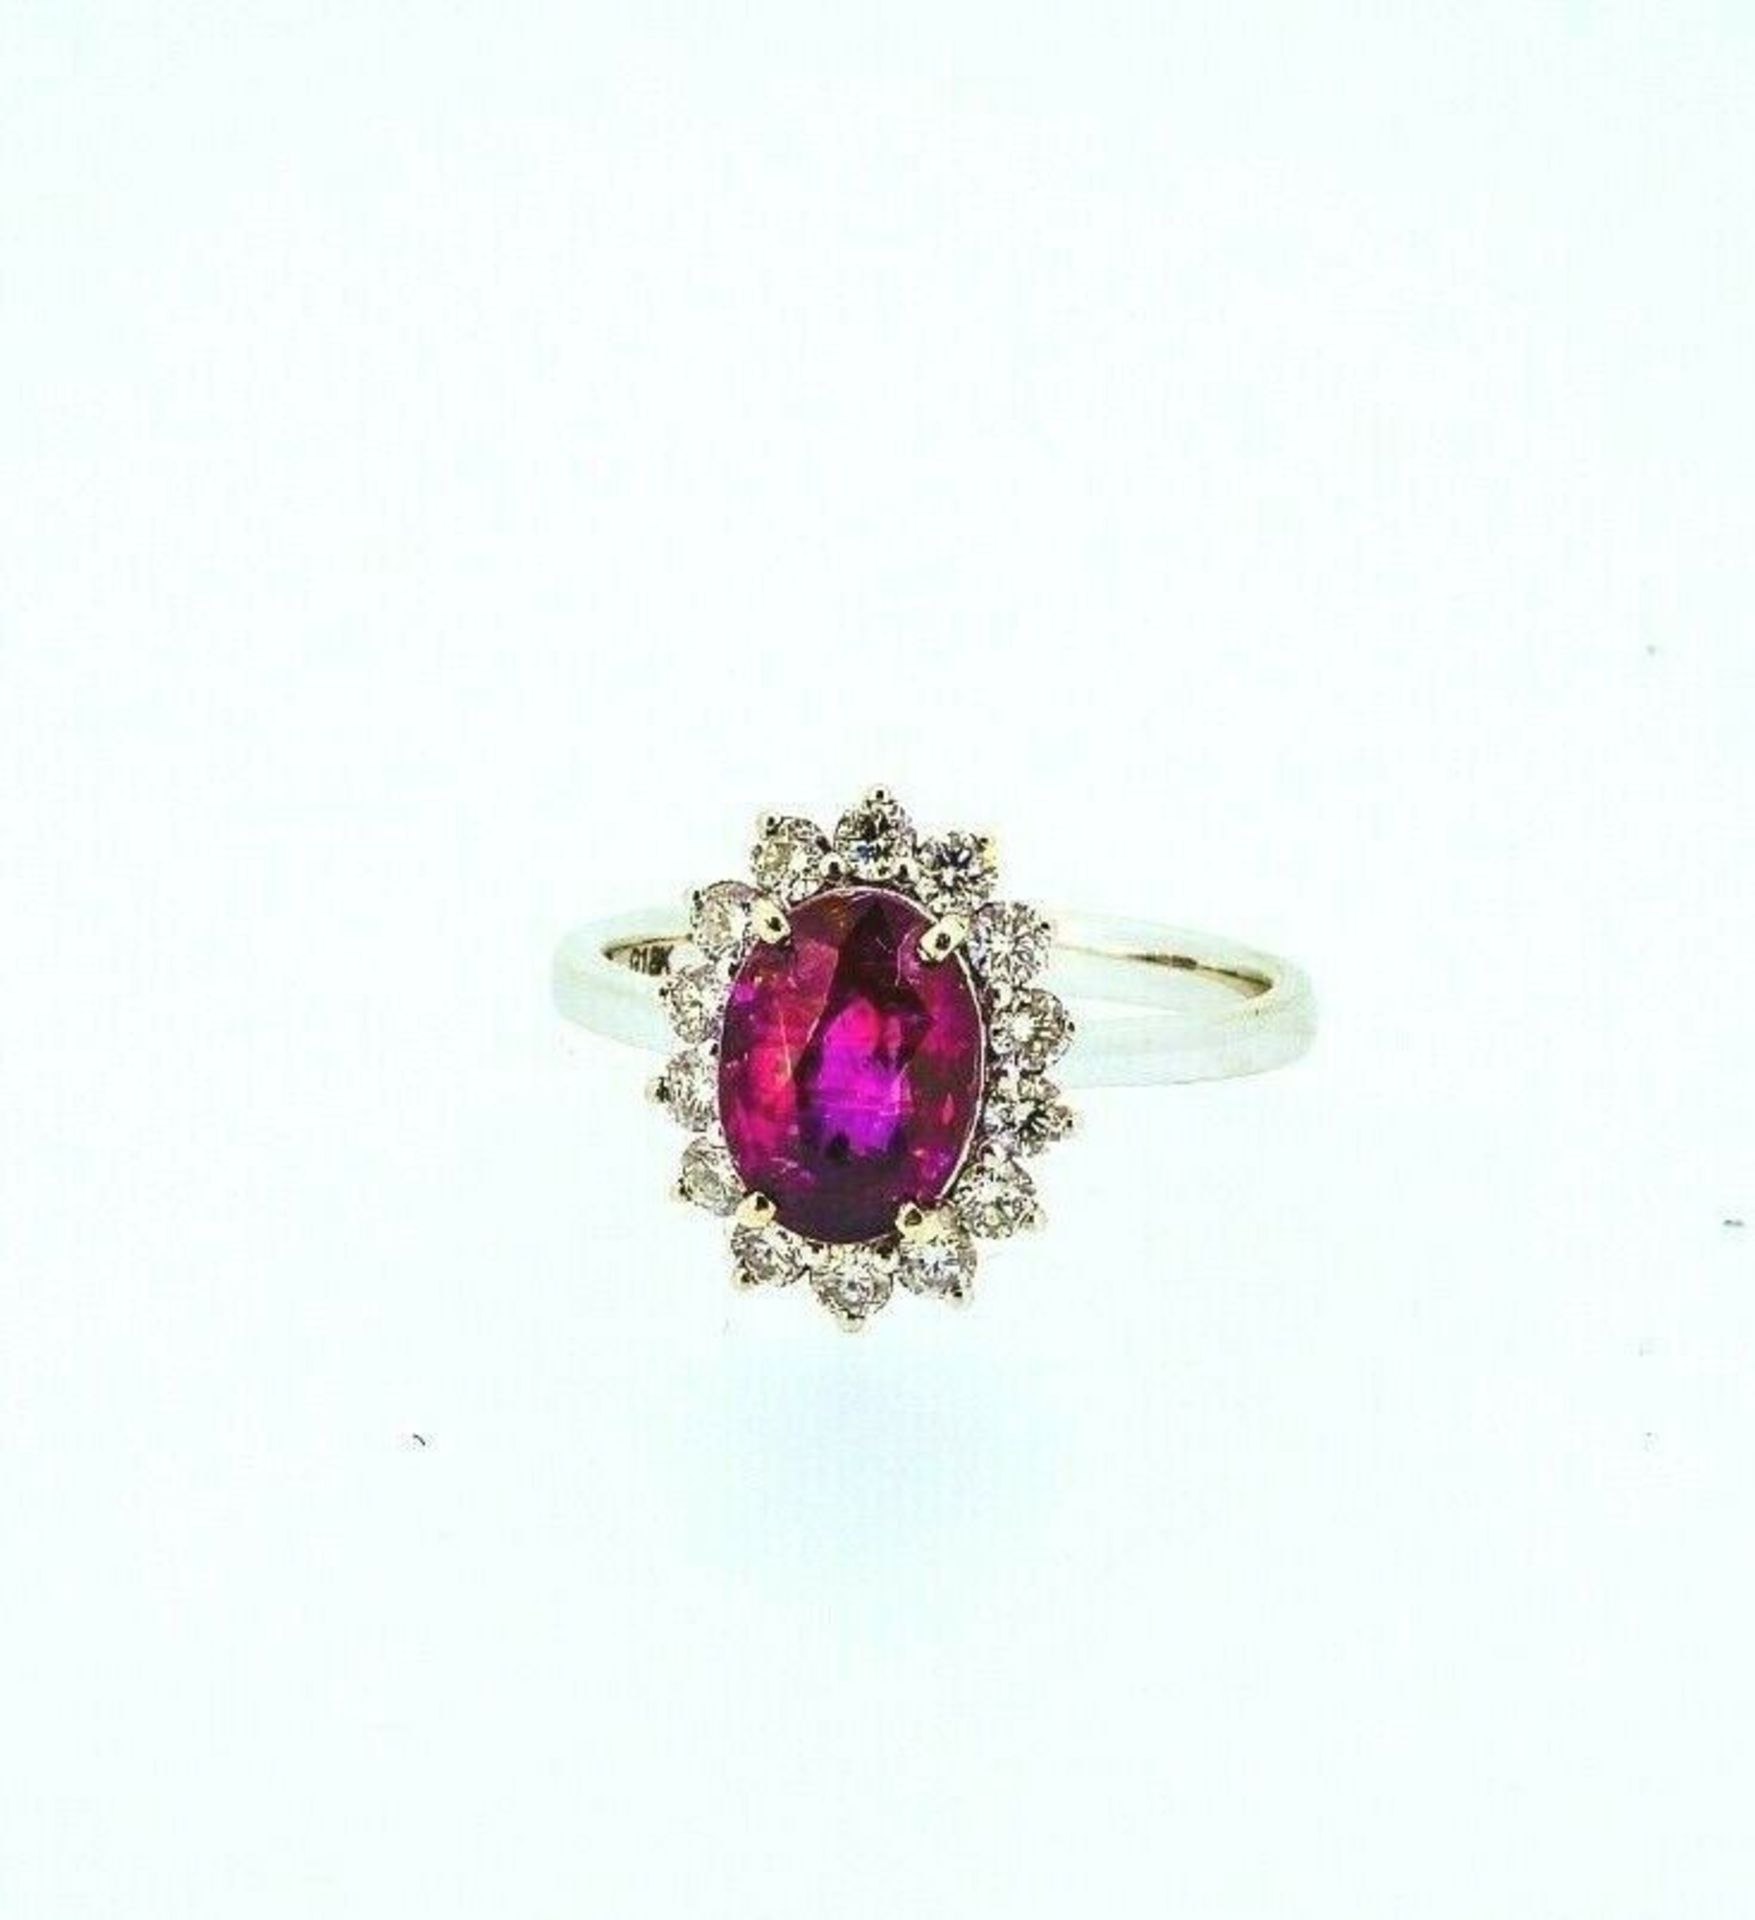 Certified 3.33 ct Vivid Pink Clean VS Untreated Sapphire & Diamonds Ring - Image 3 of 7